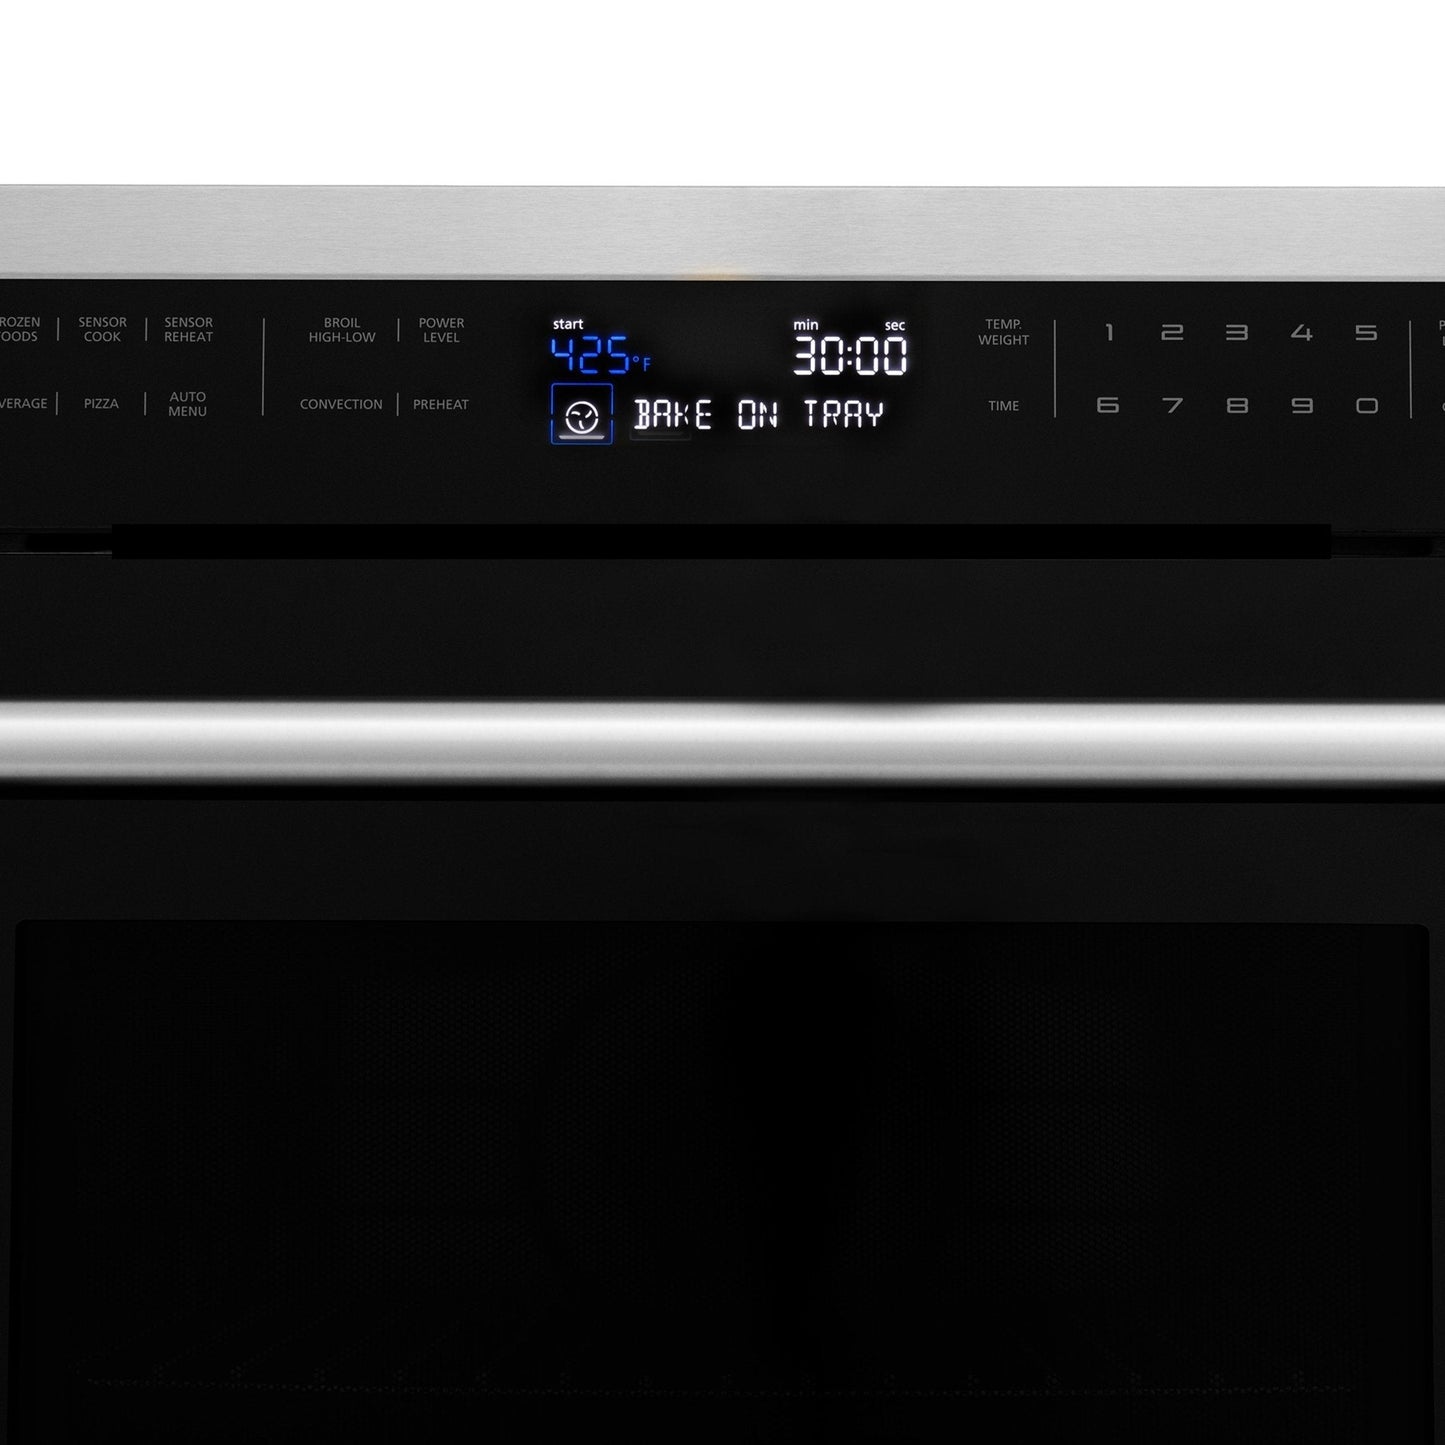 ZLINE 24" Built-in Convection Microwave Oven with Speed and Sensor Cooking (MWO-24)